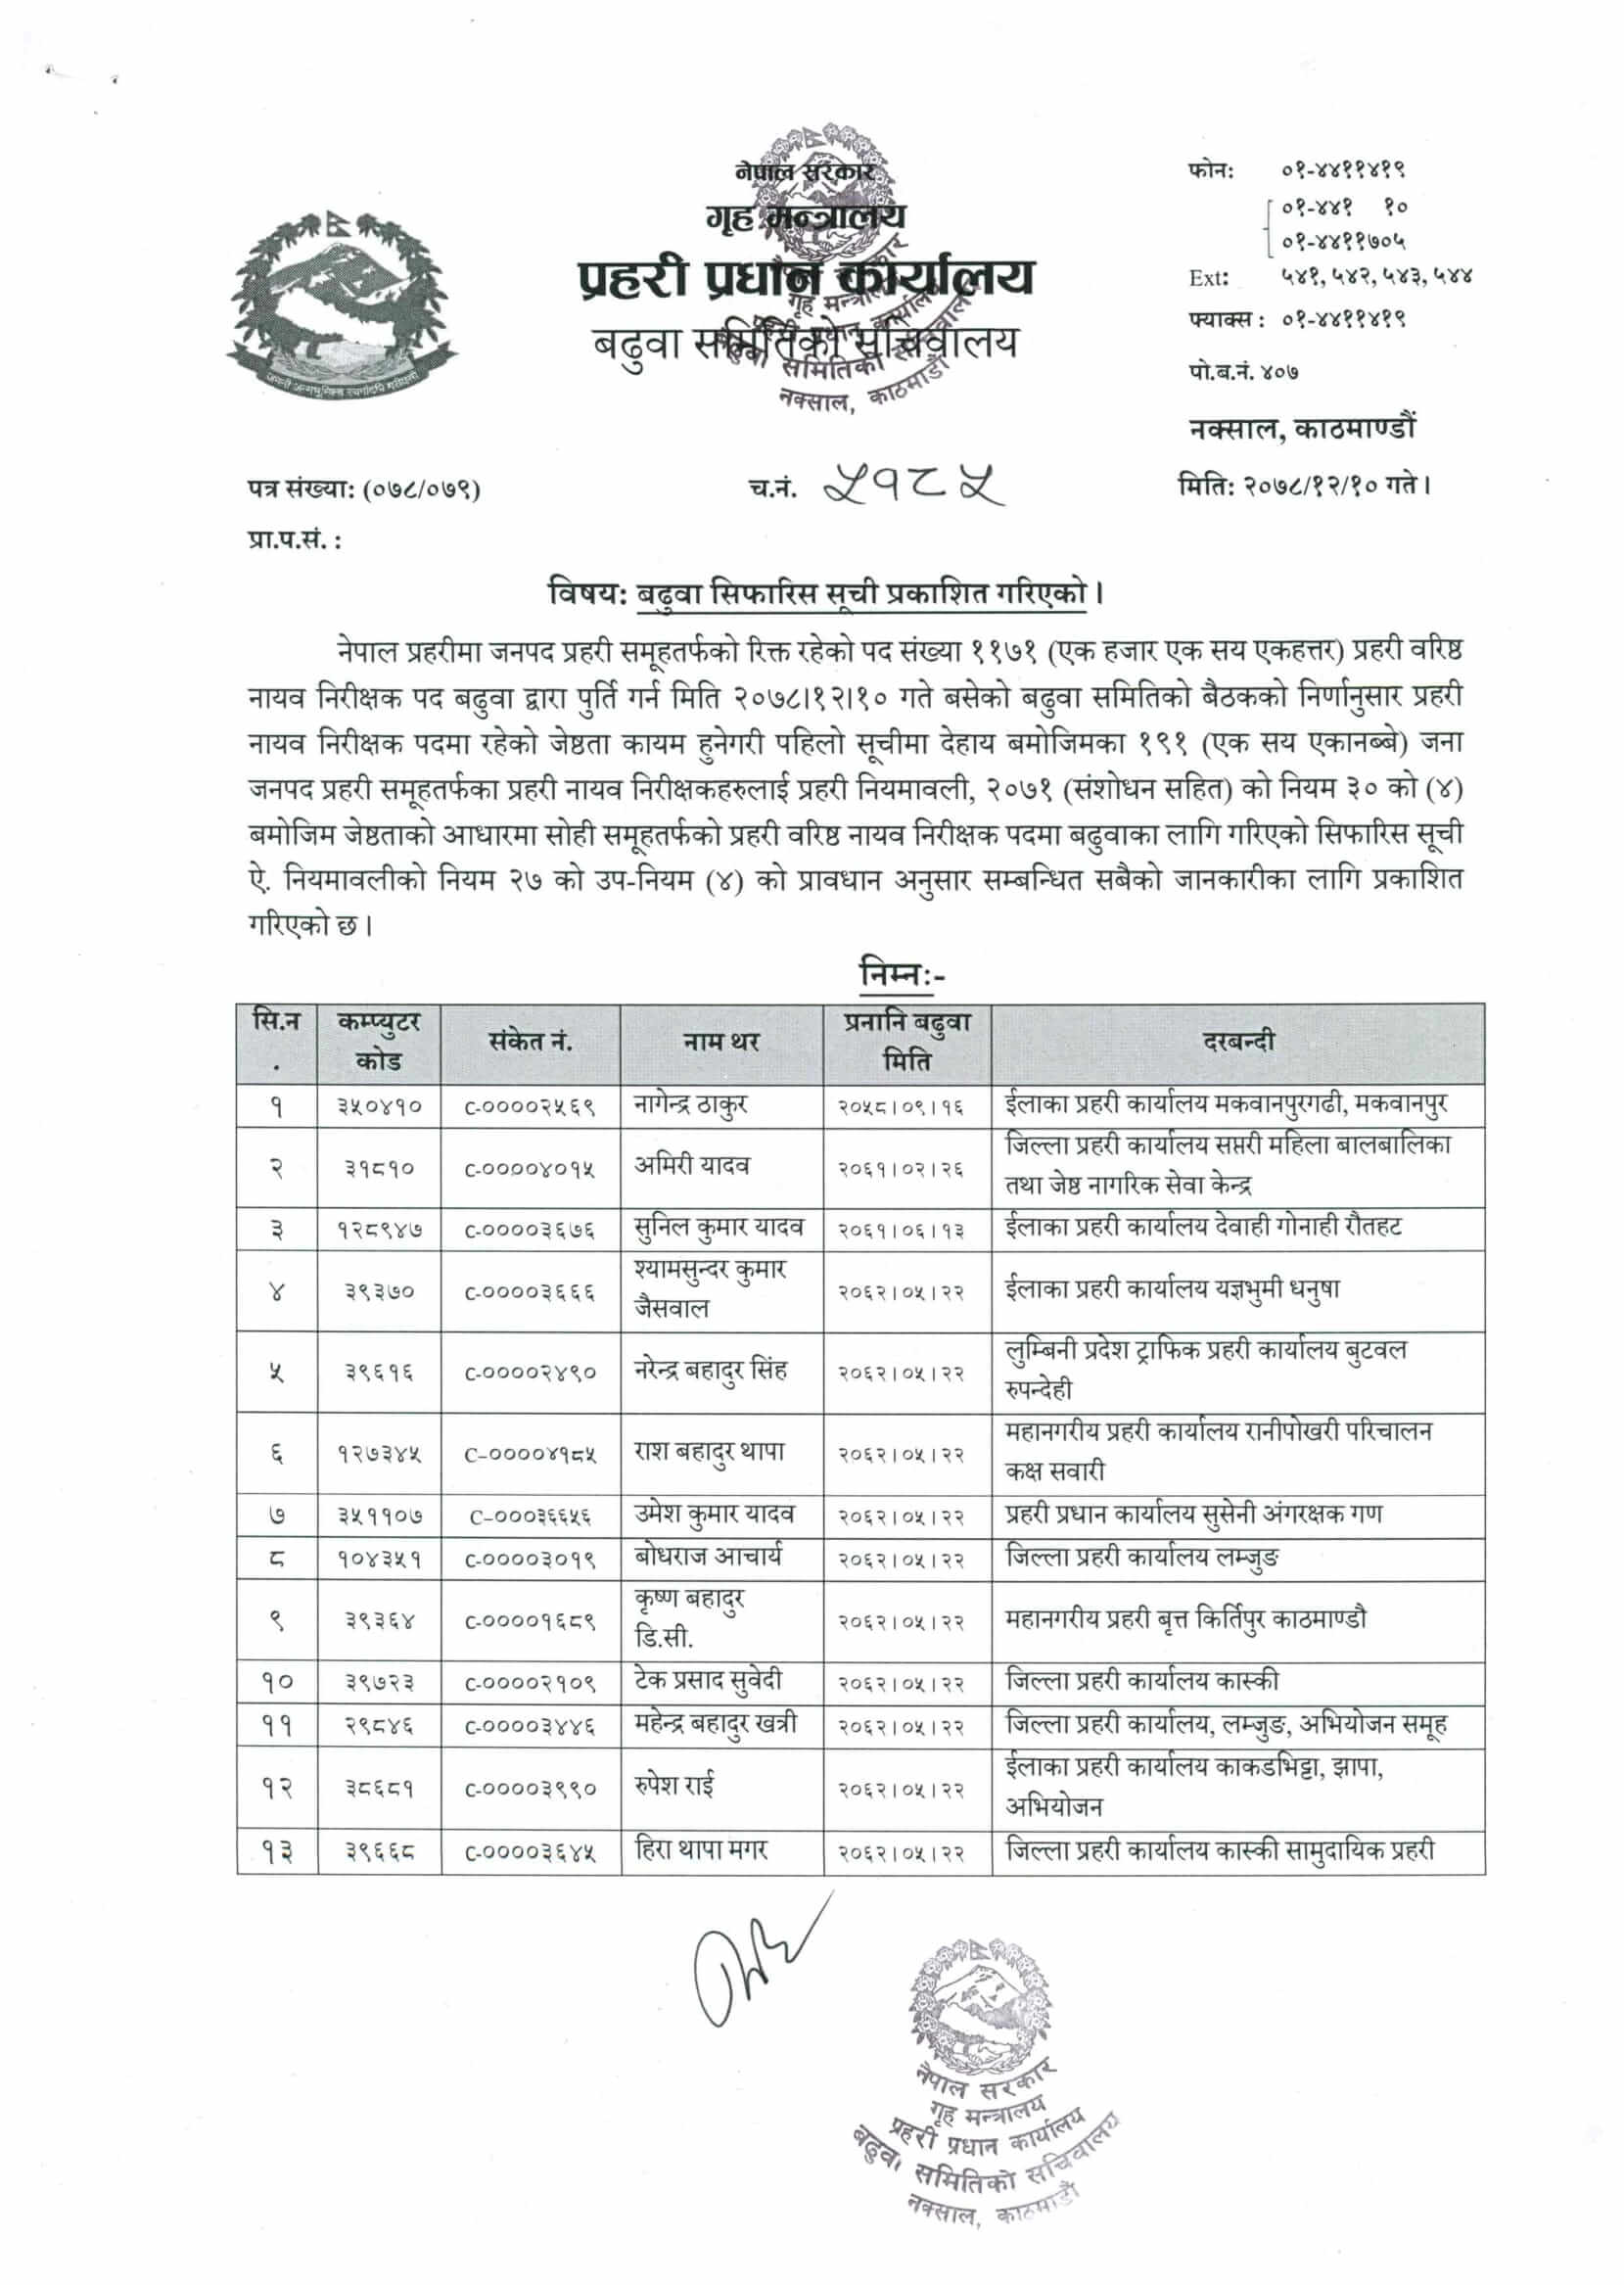 Nepal Police Senior Sub-Inspector Promotion Recommend List